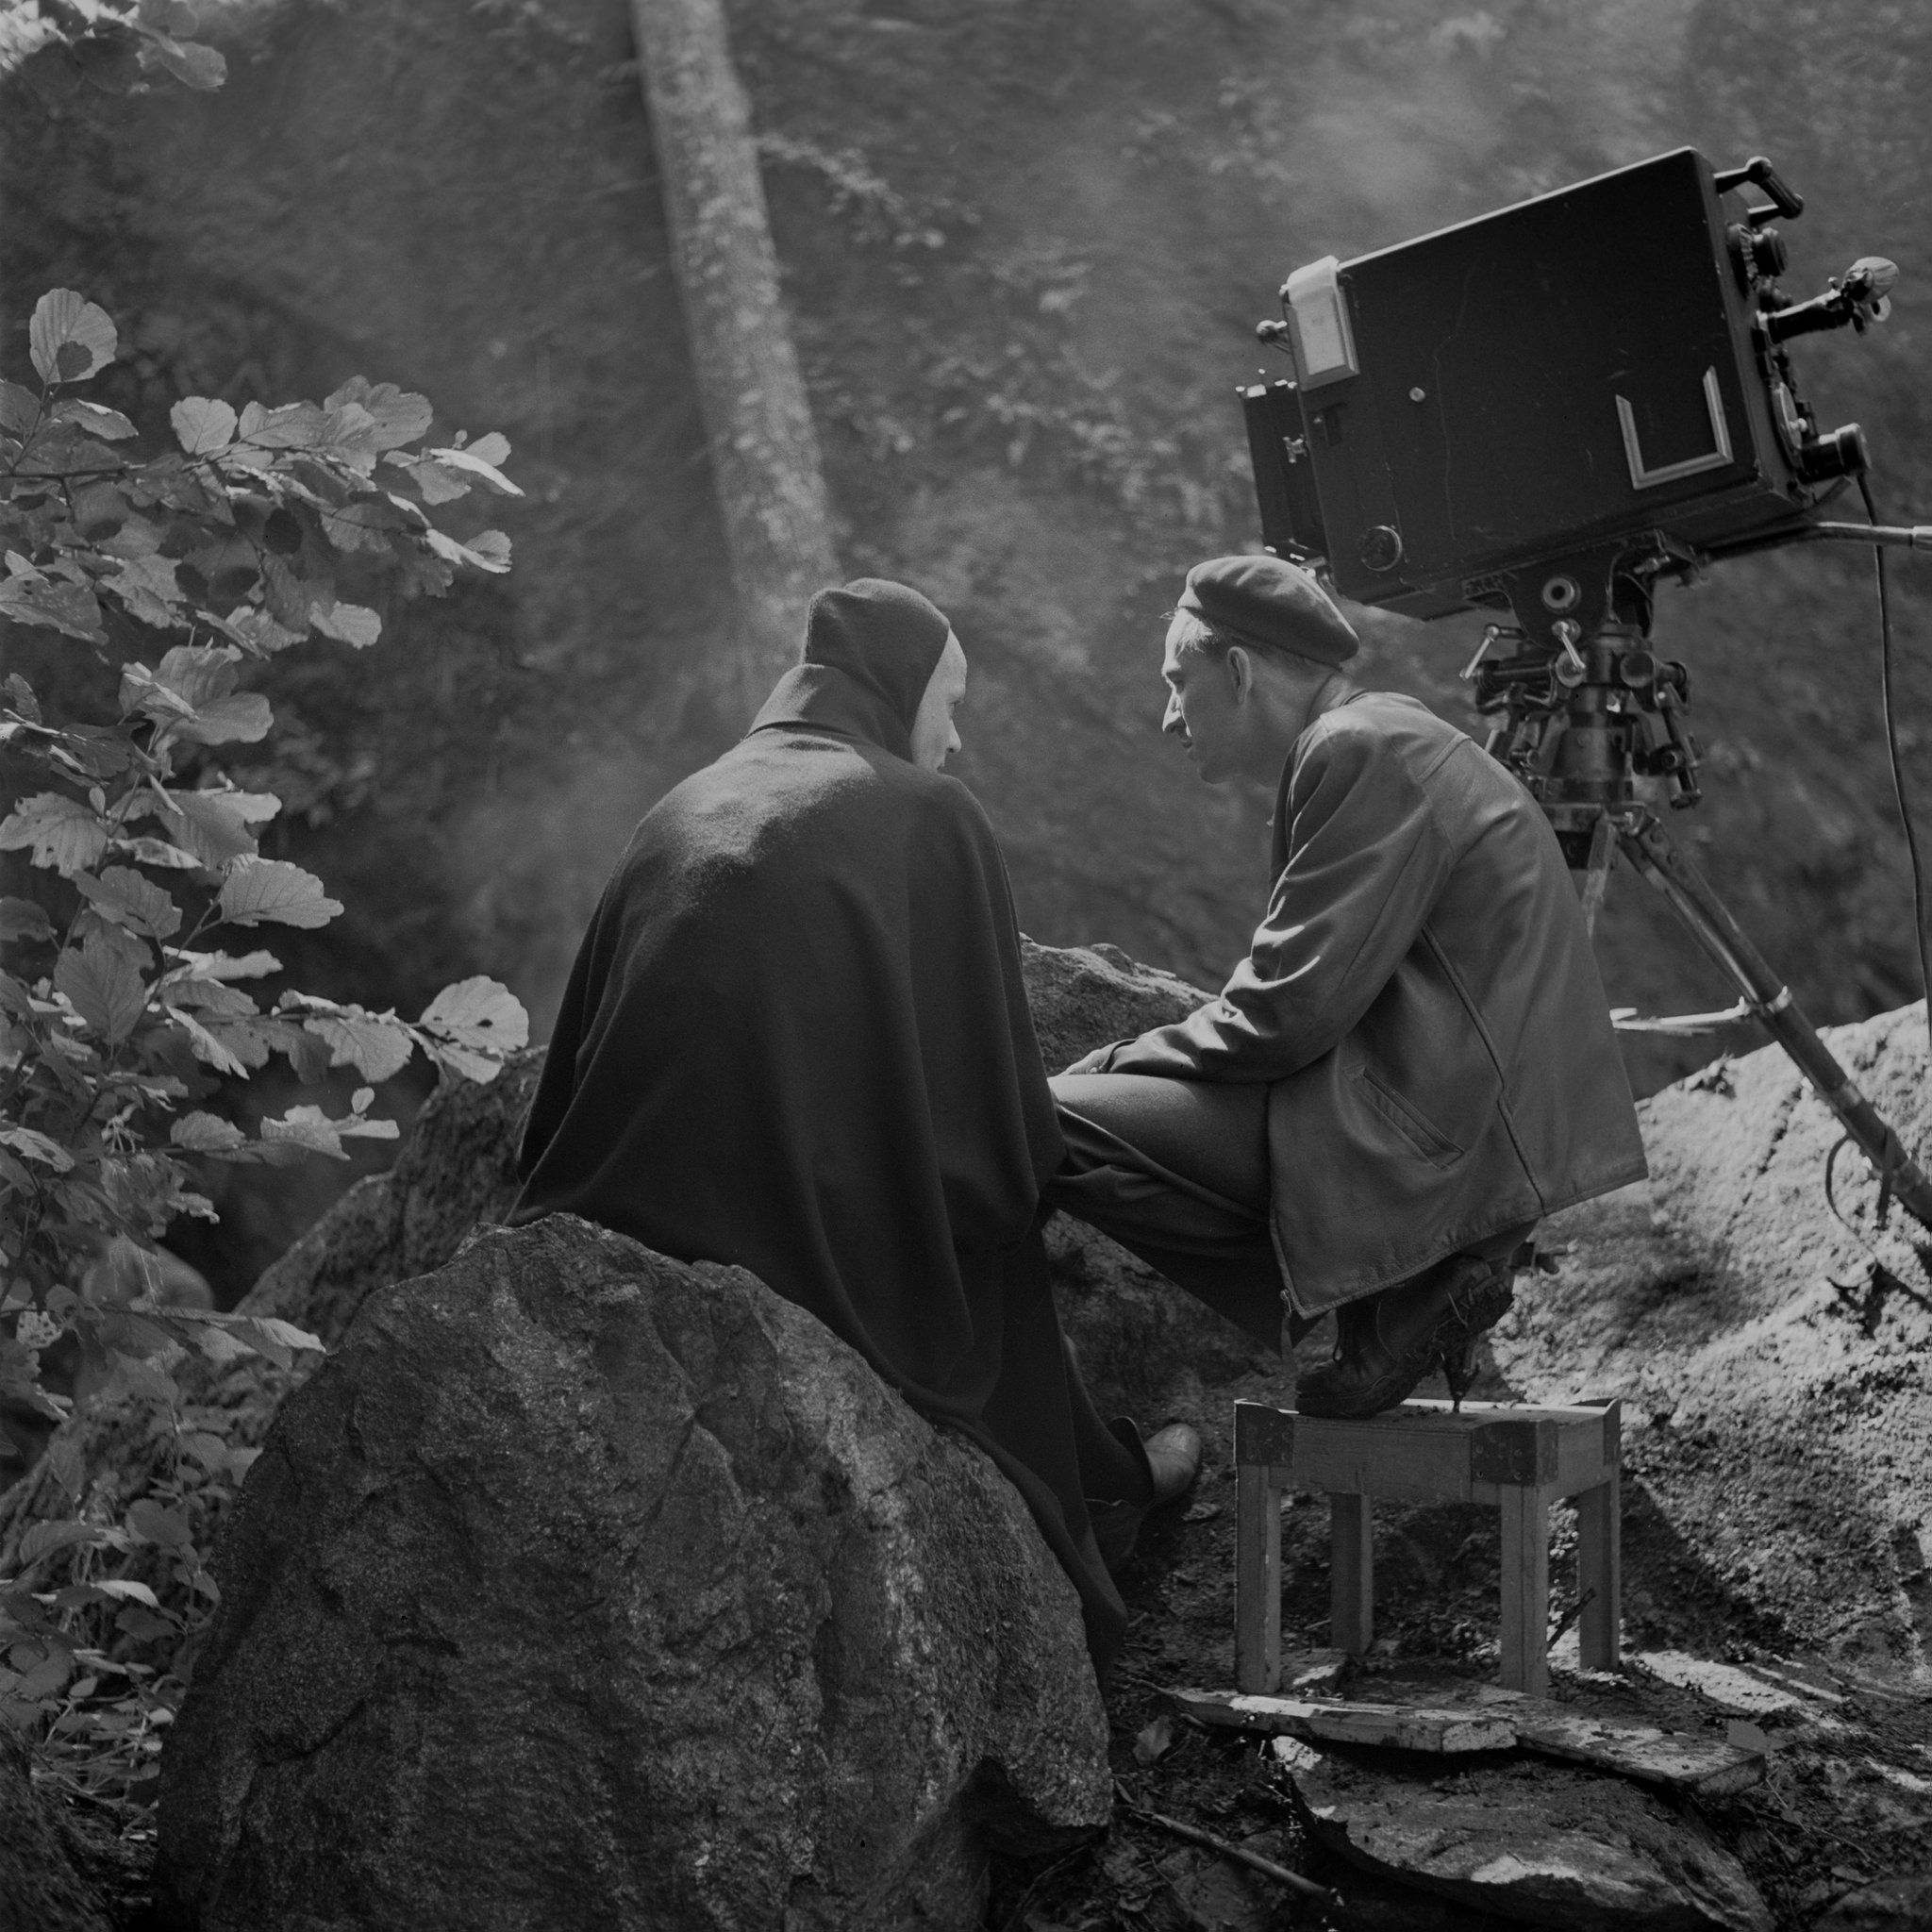 Bergman 39 S The Seventh Seal 1957 The Seventh Seal